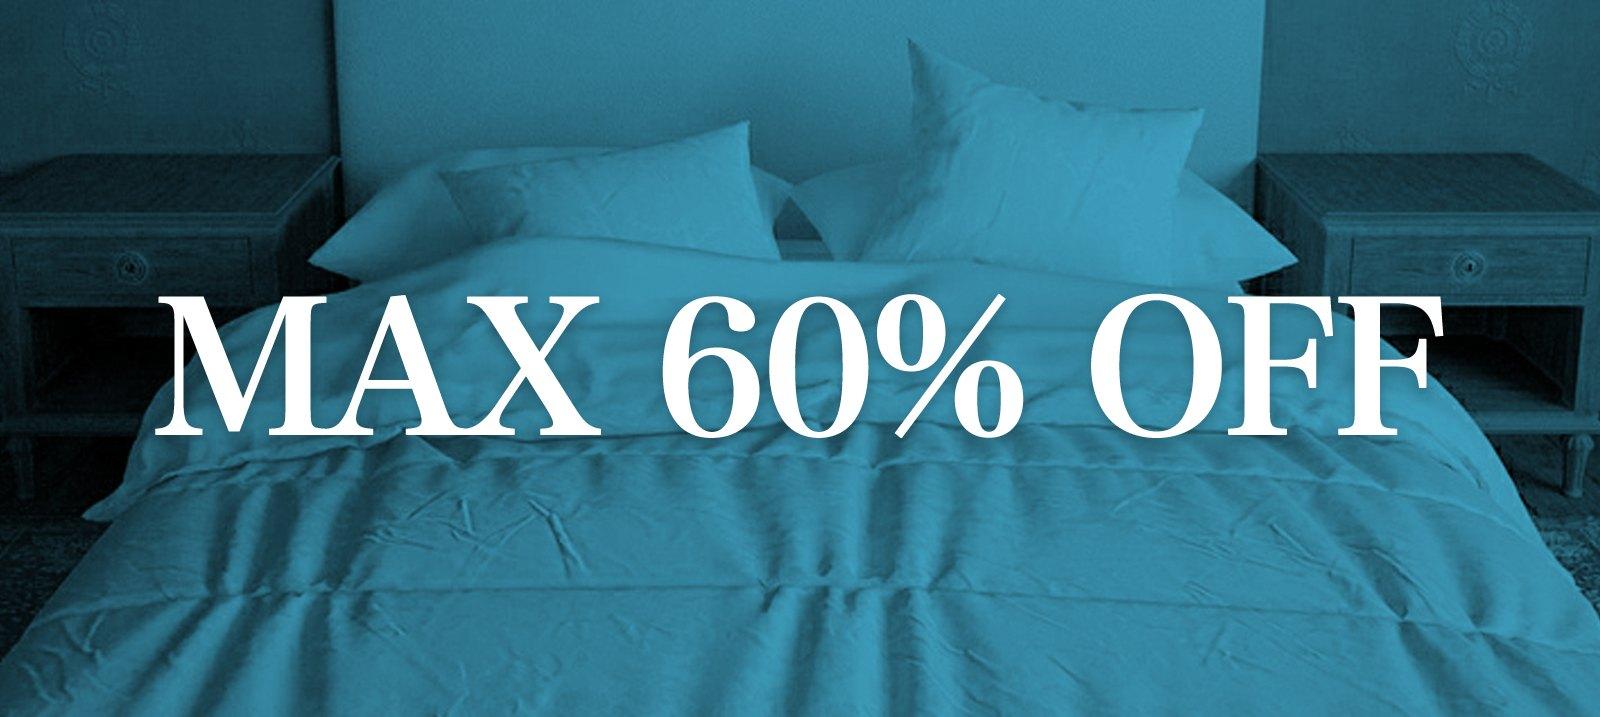 Bed linen special sale